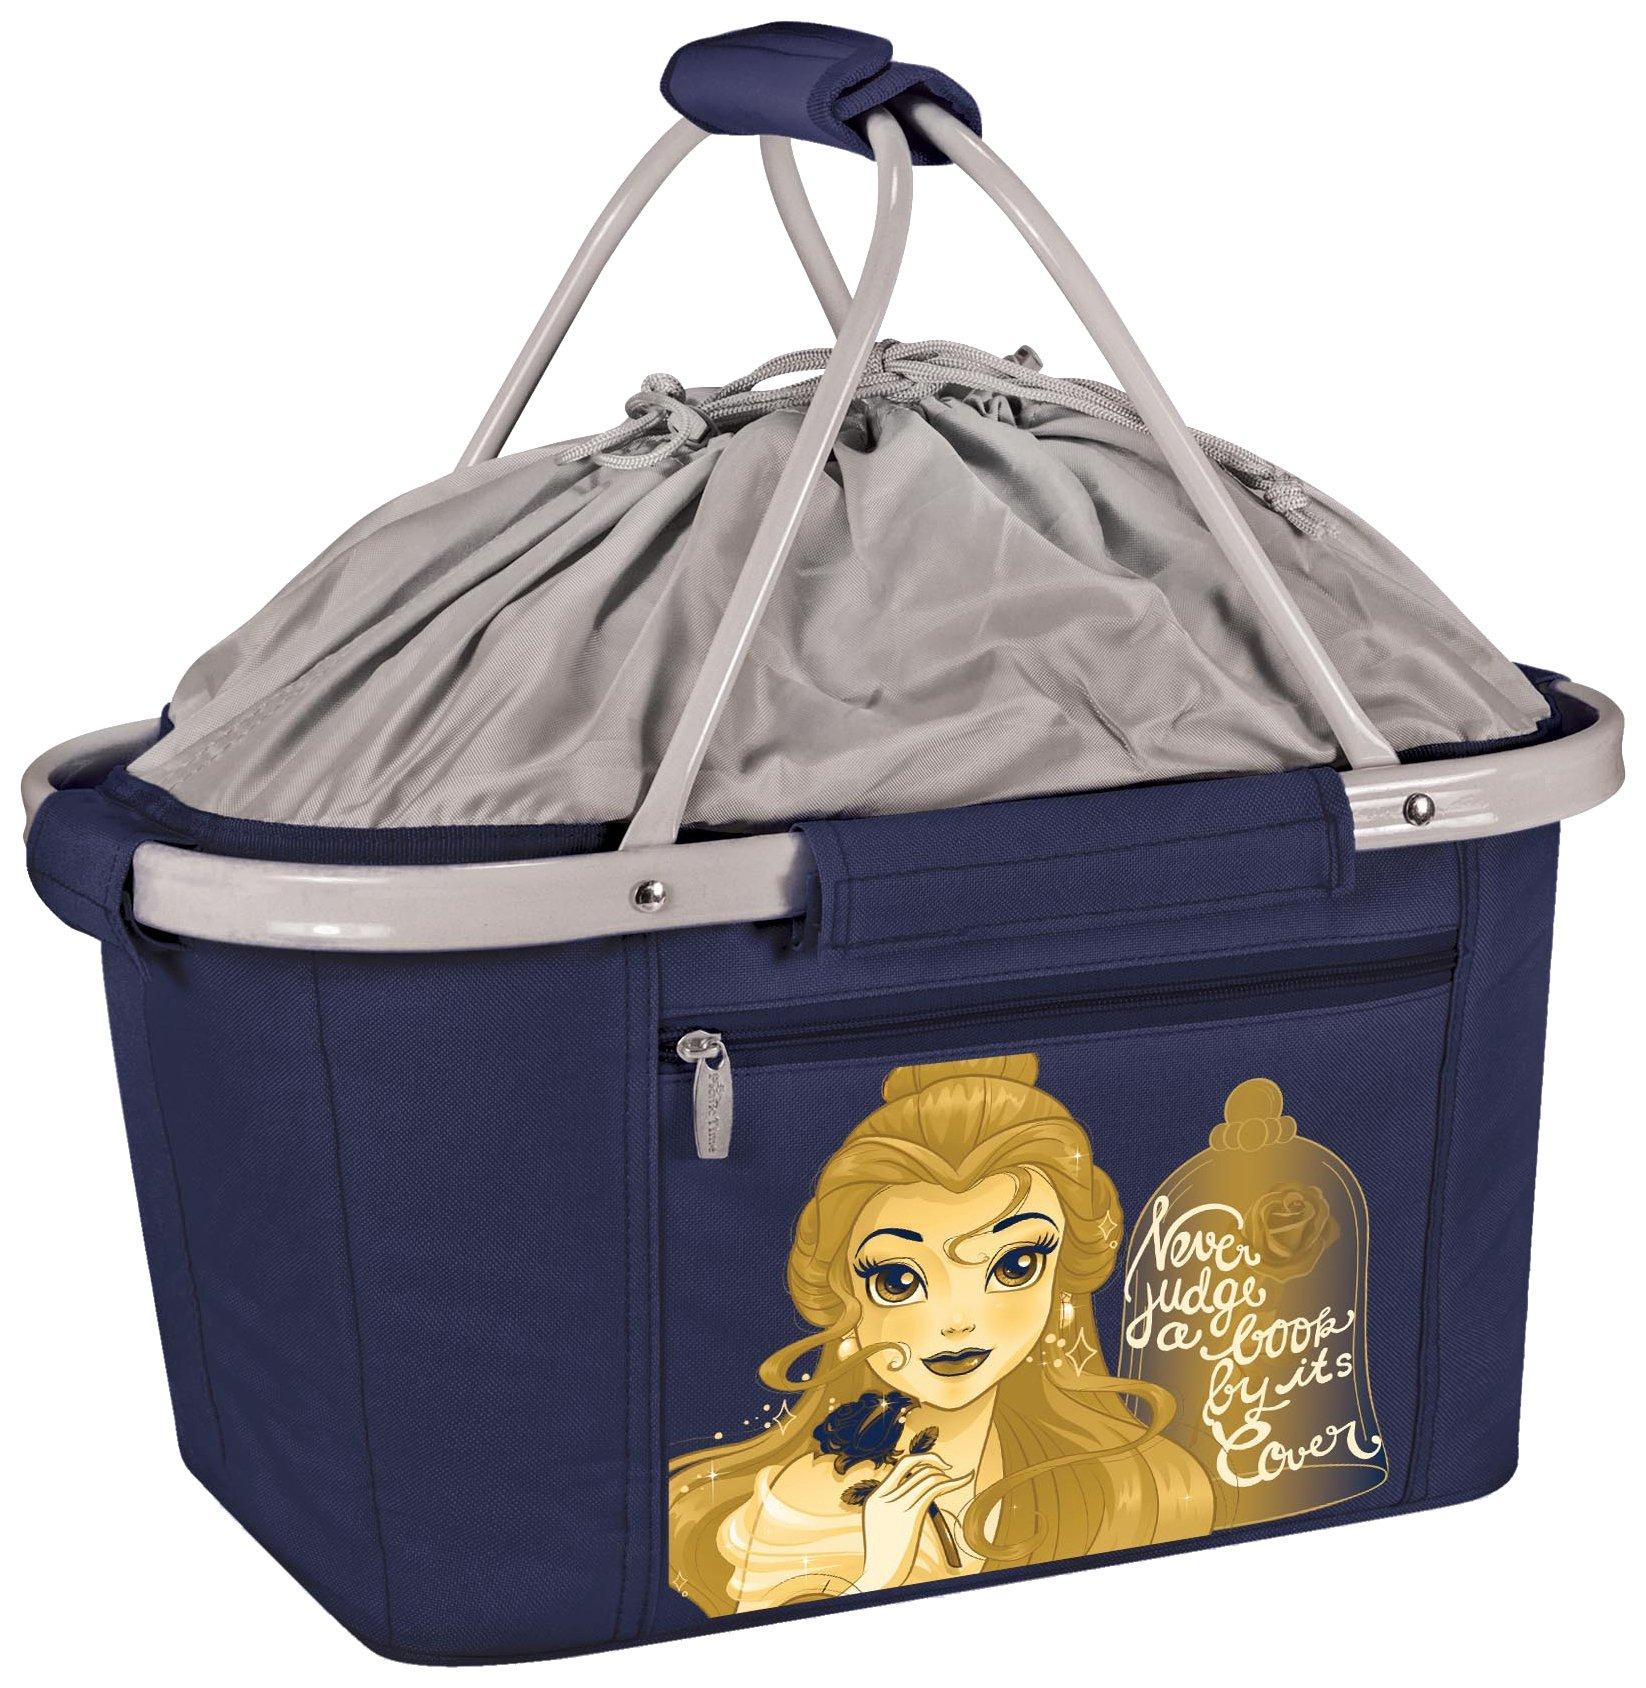 Beauty & the Beast Metro Collapsible Basket Tote